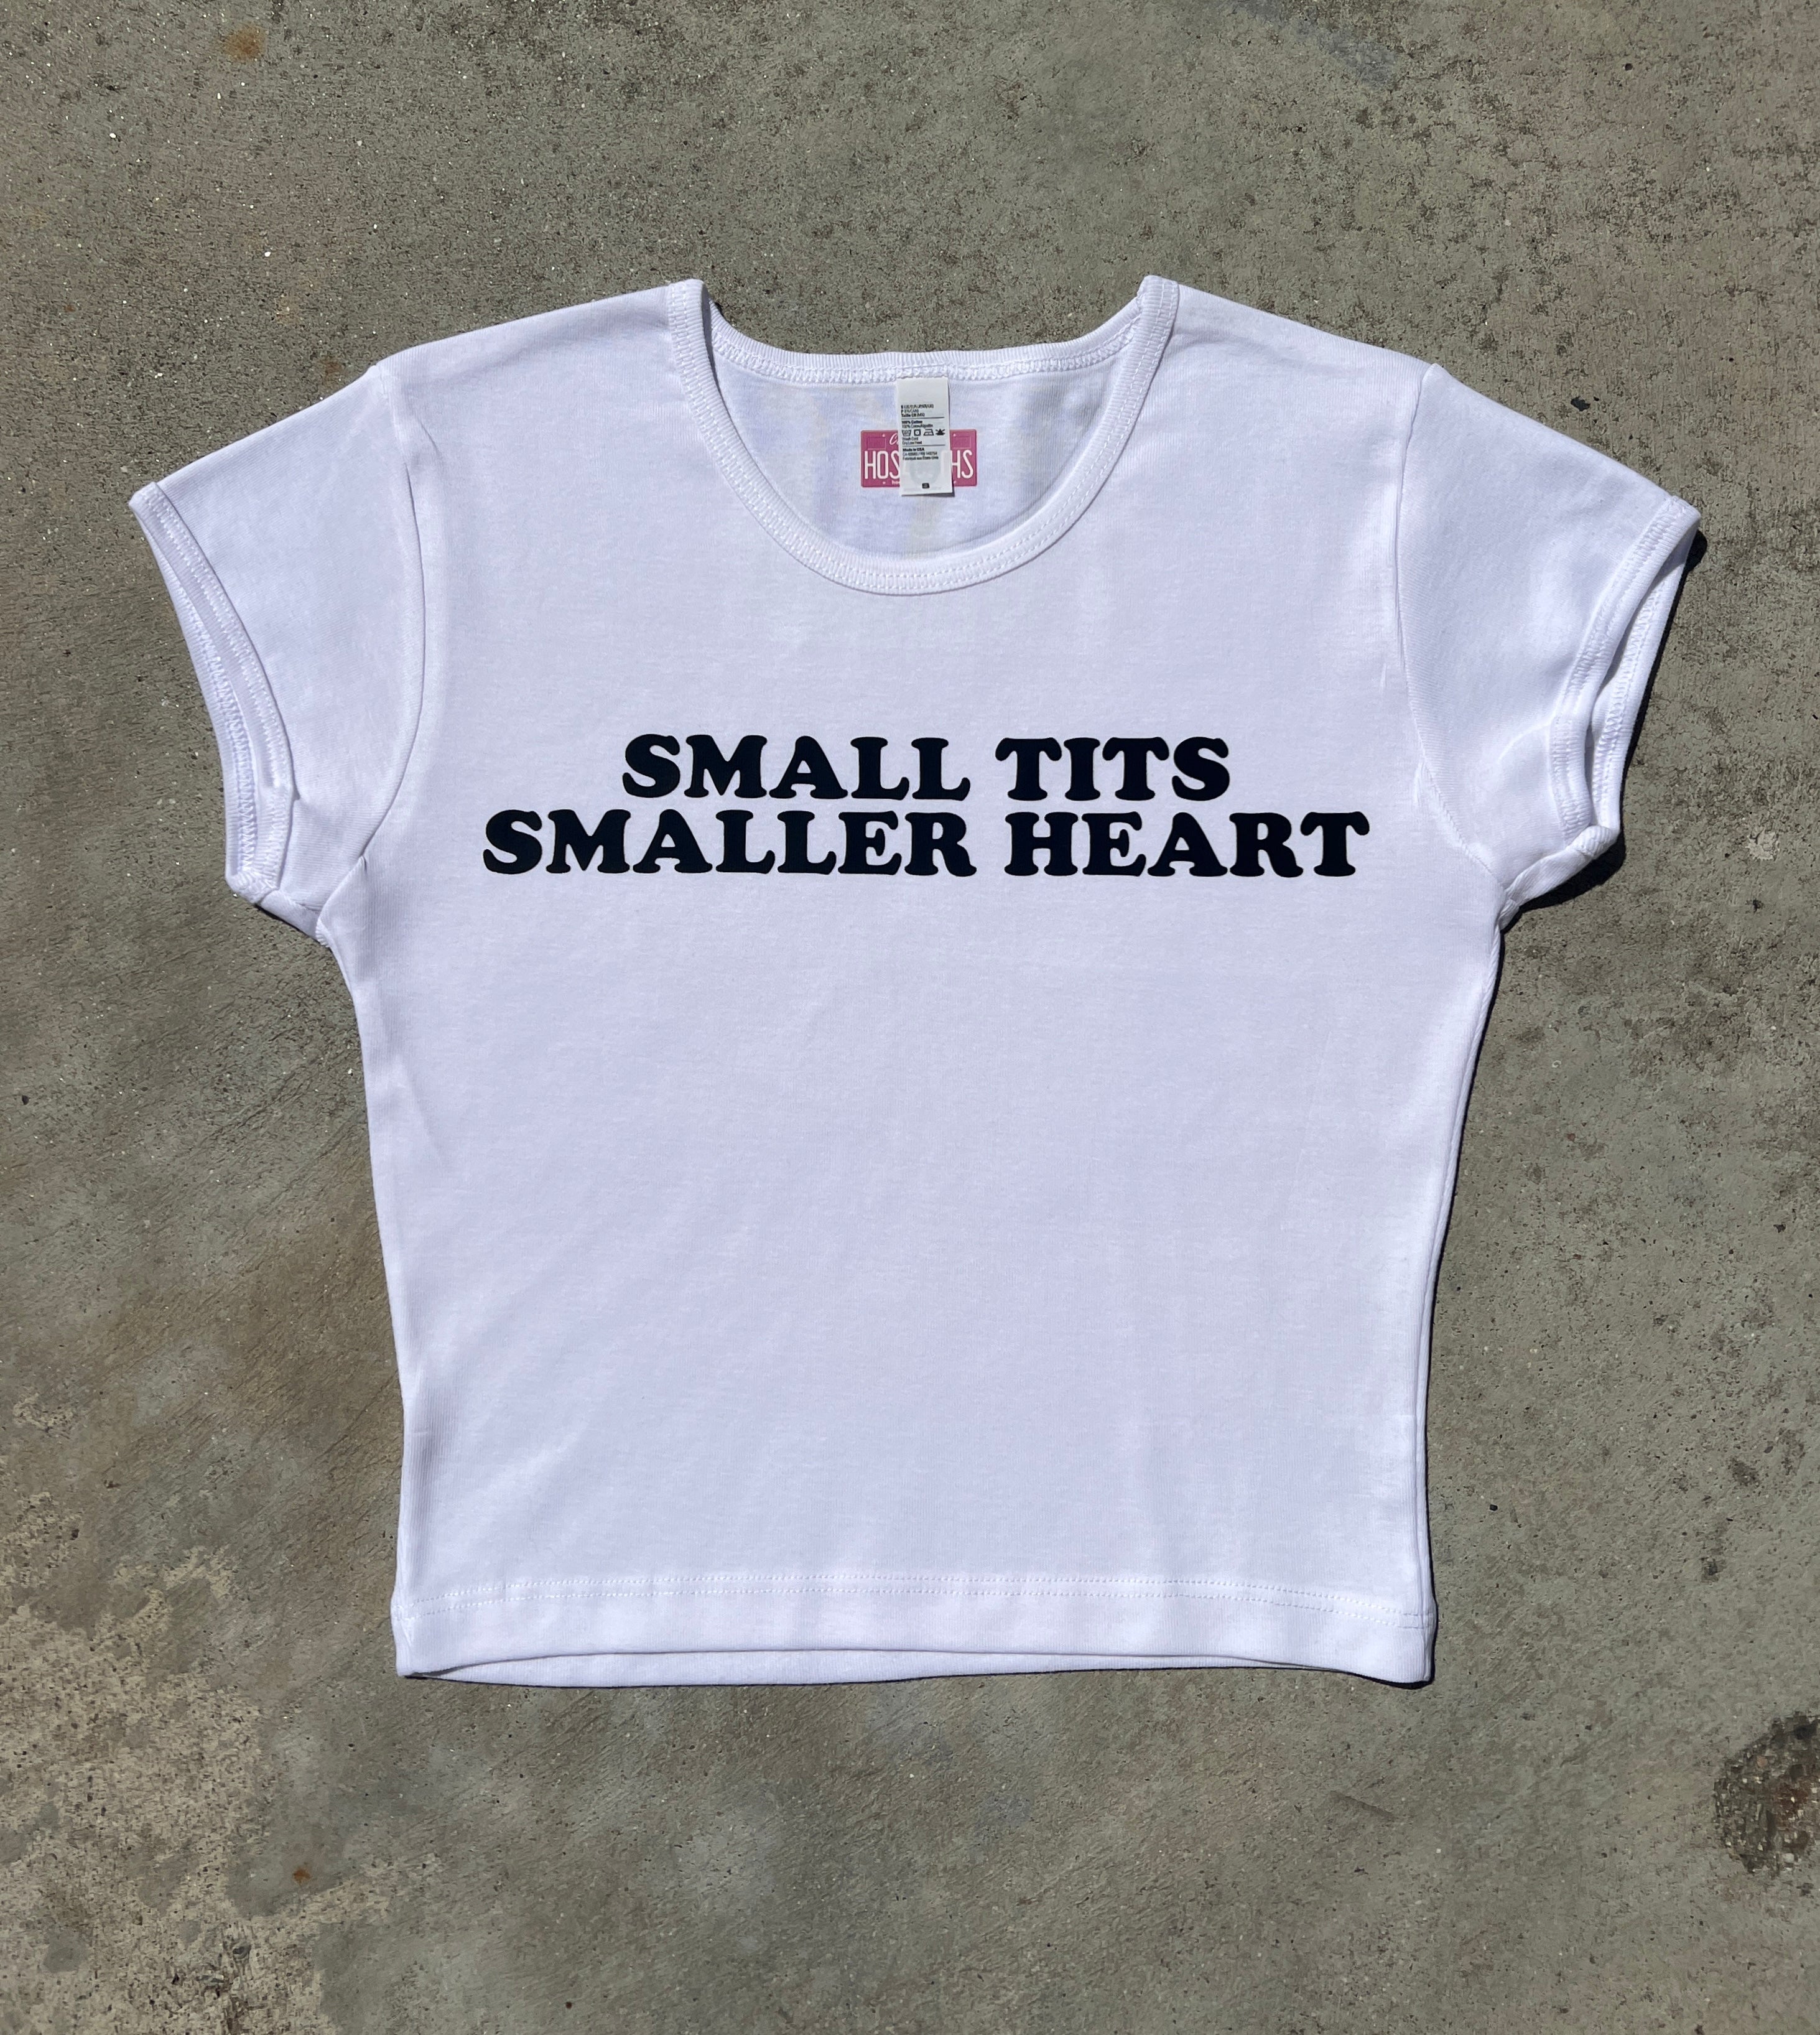 Small Tits Smaller Hearshirt by Macoroo - Issuu